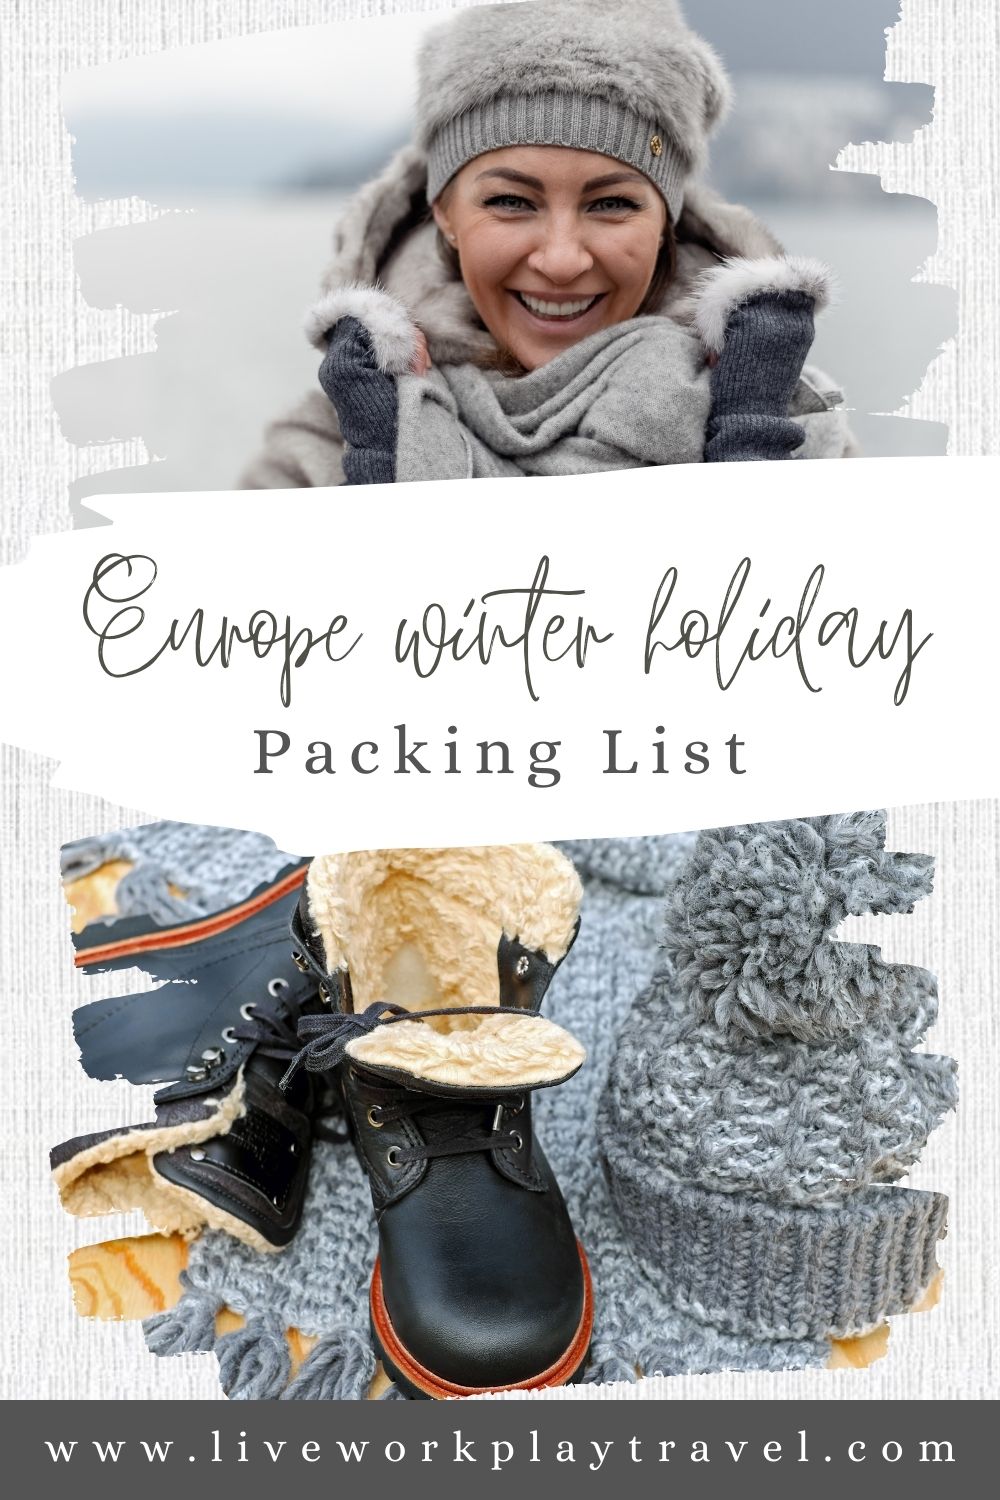 When You Work And Travel In Europe You May Take A Winter Holiday in Europe. As It Can Be So Cold You Will Need To Pack Accordingly. Here Is A Suggested Packing List For A European Winter Holiday.